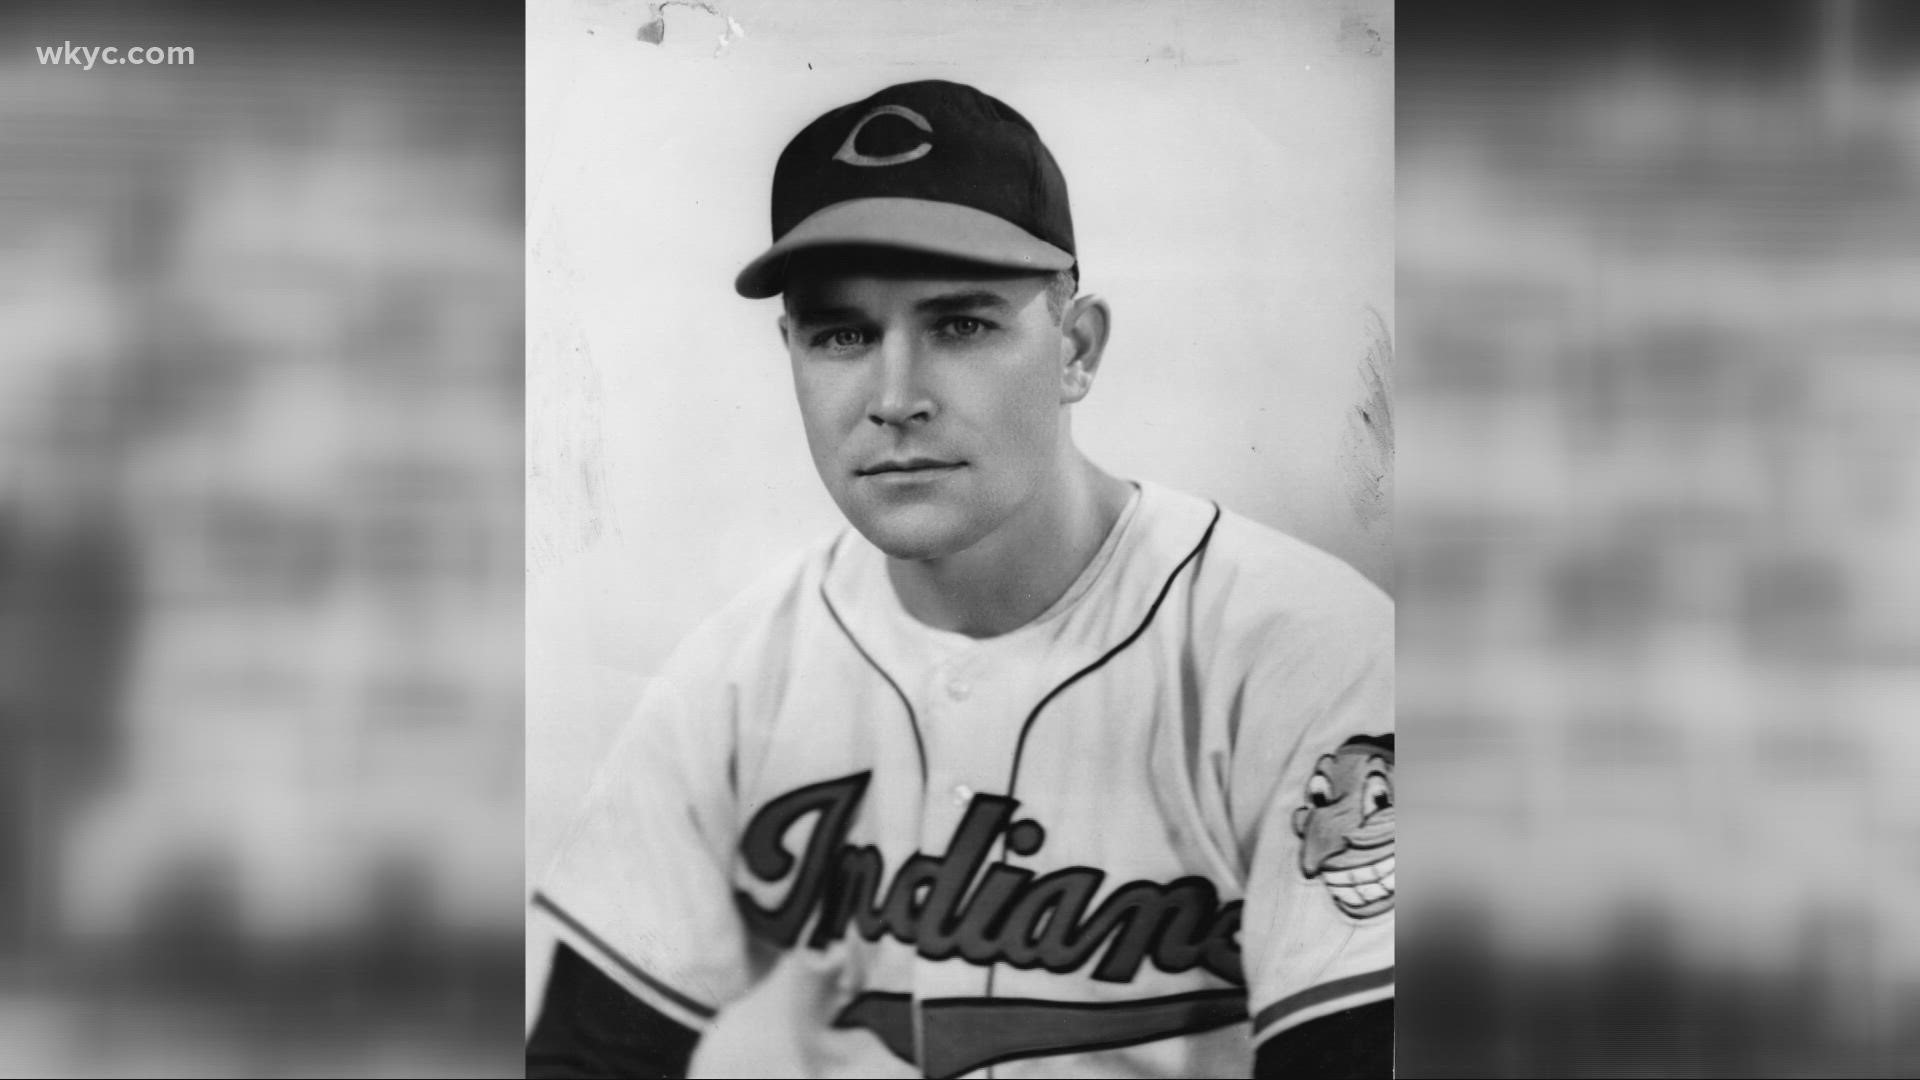 Robinson had been the oldest living former MLB player. He played with the Indians for parts of five seasons.